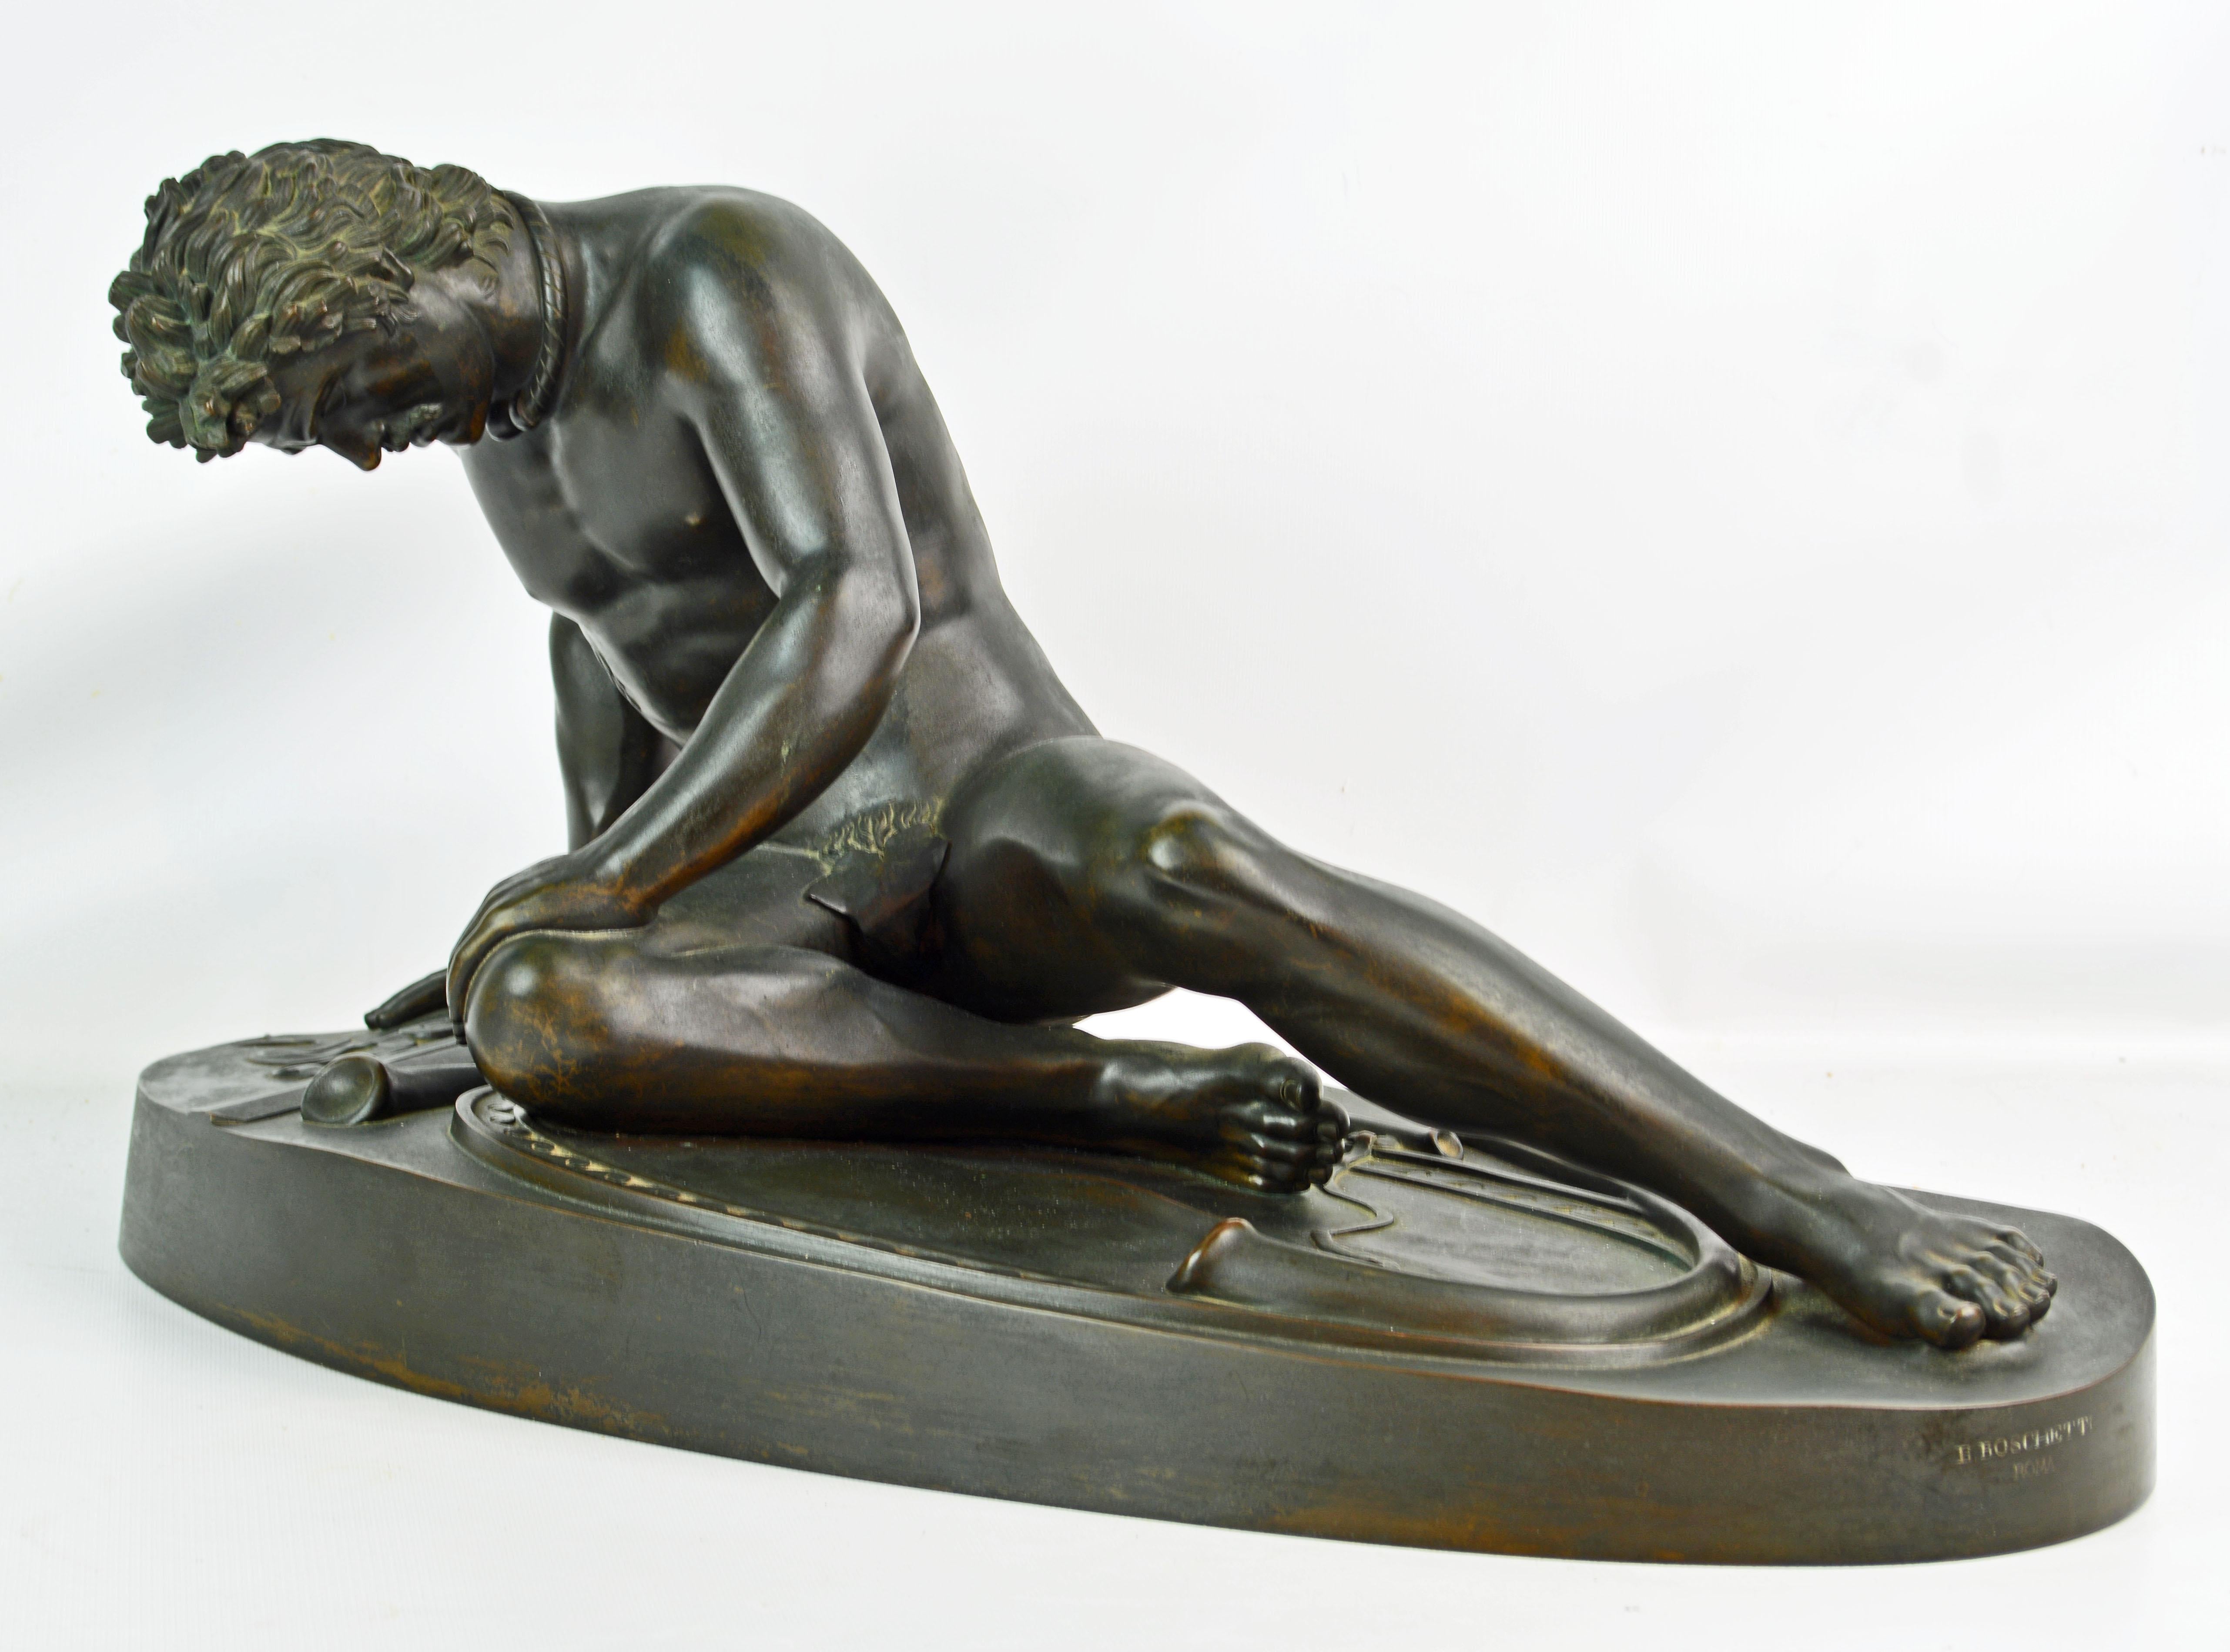 Greco Roman 19th Century Bronze Statue the Dying Gaul by B. Boschetti Roma after the Antique